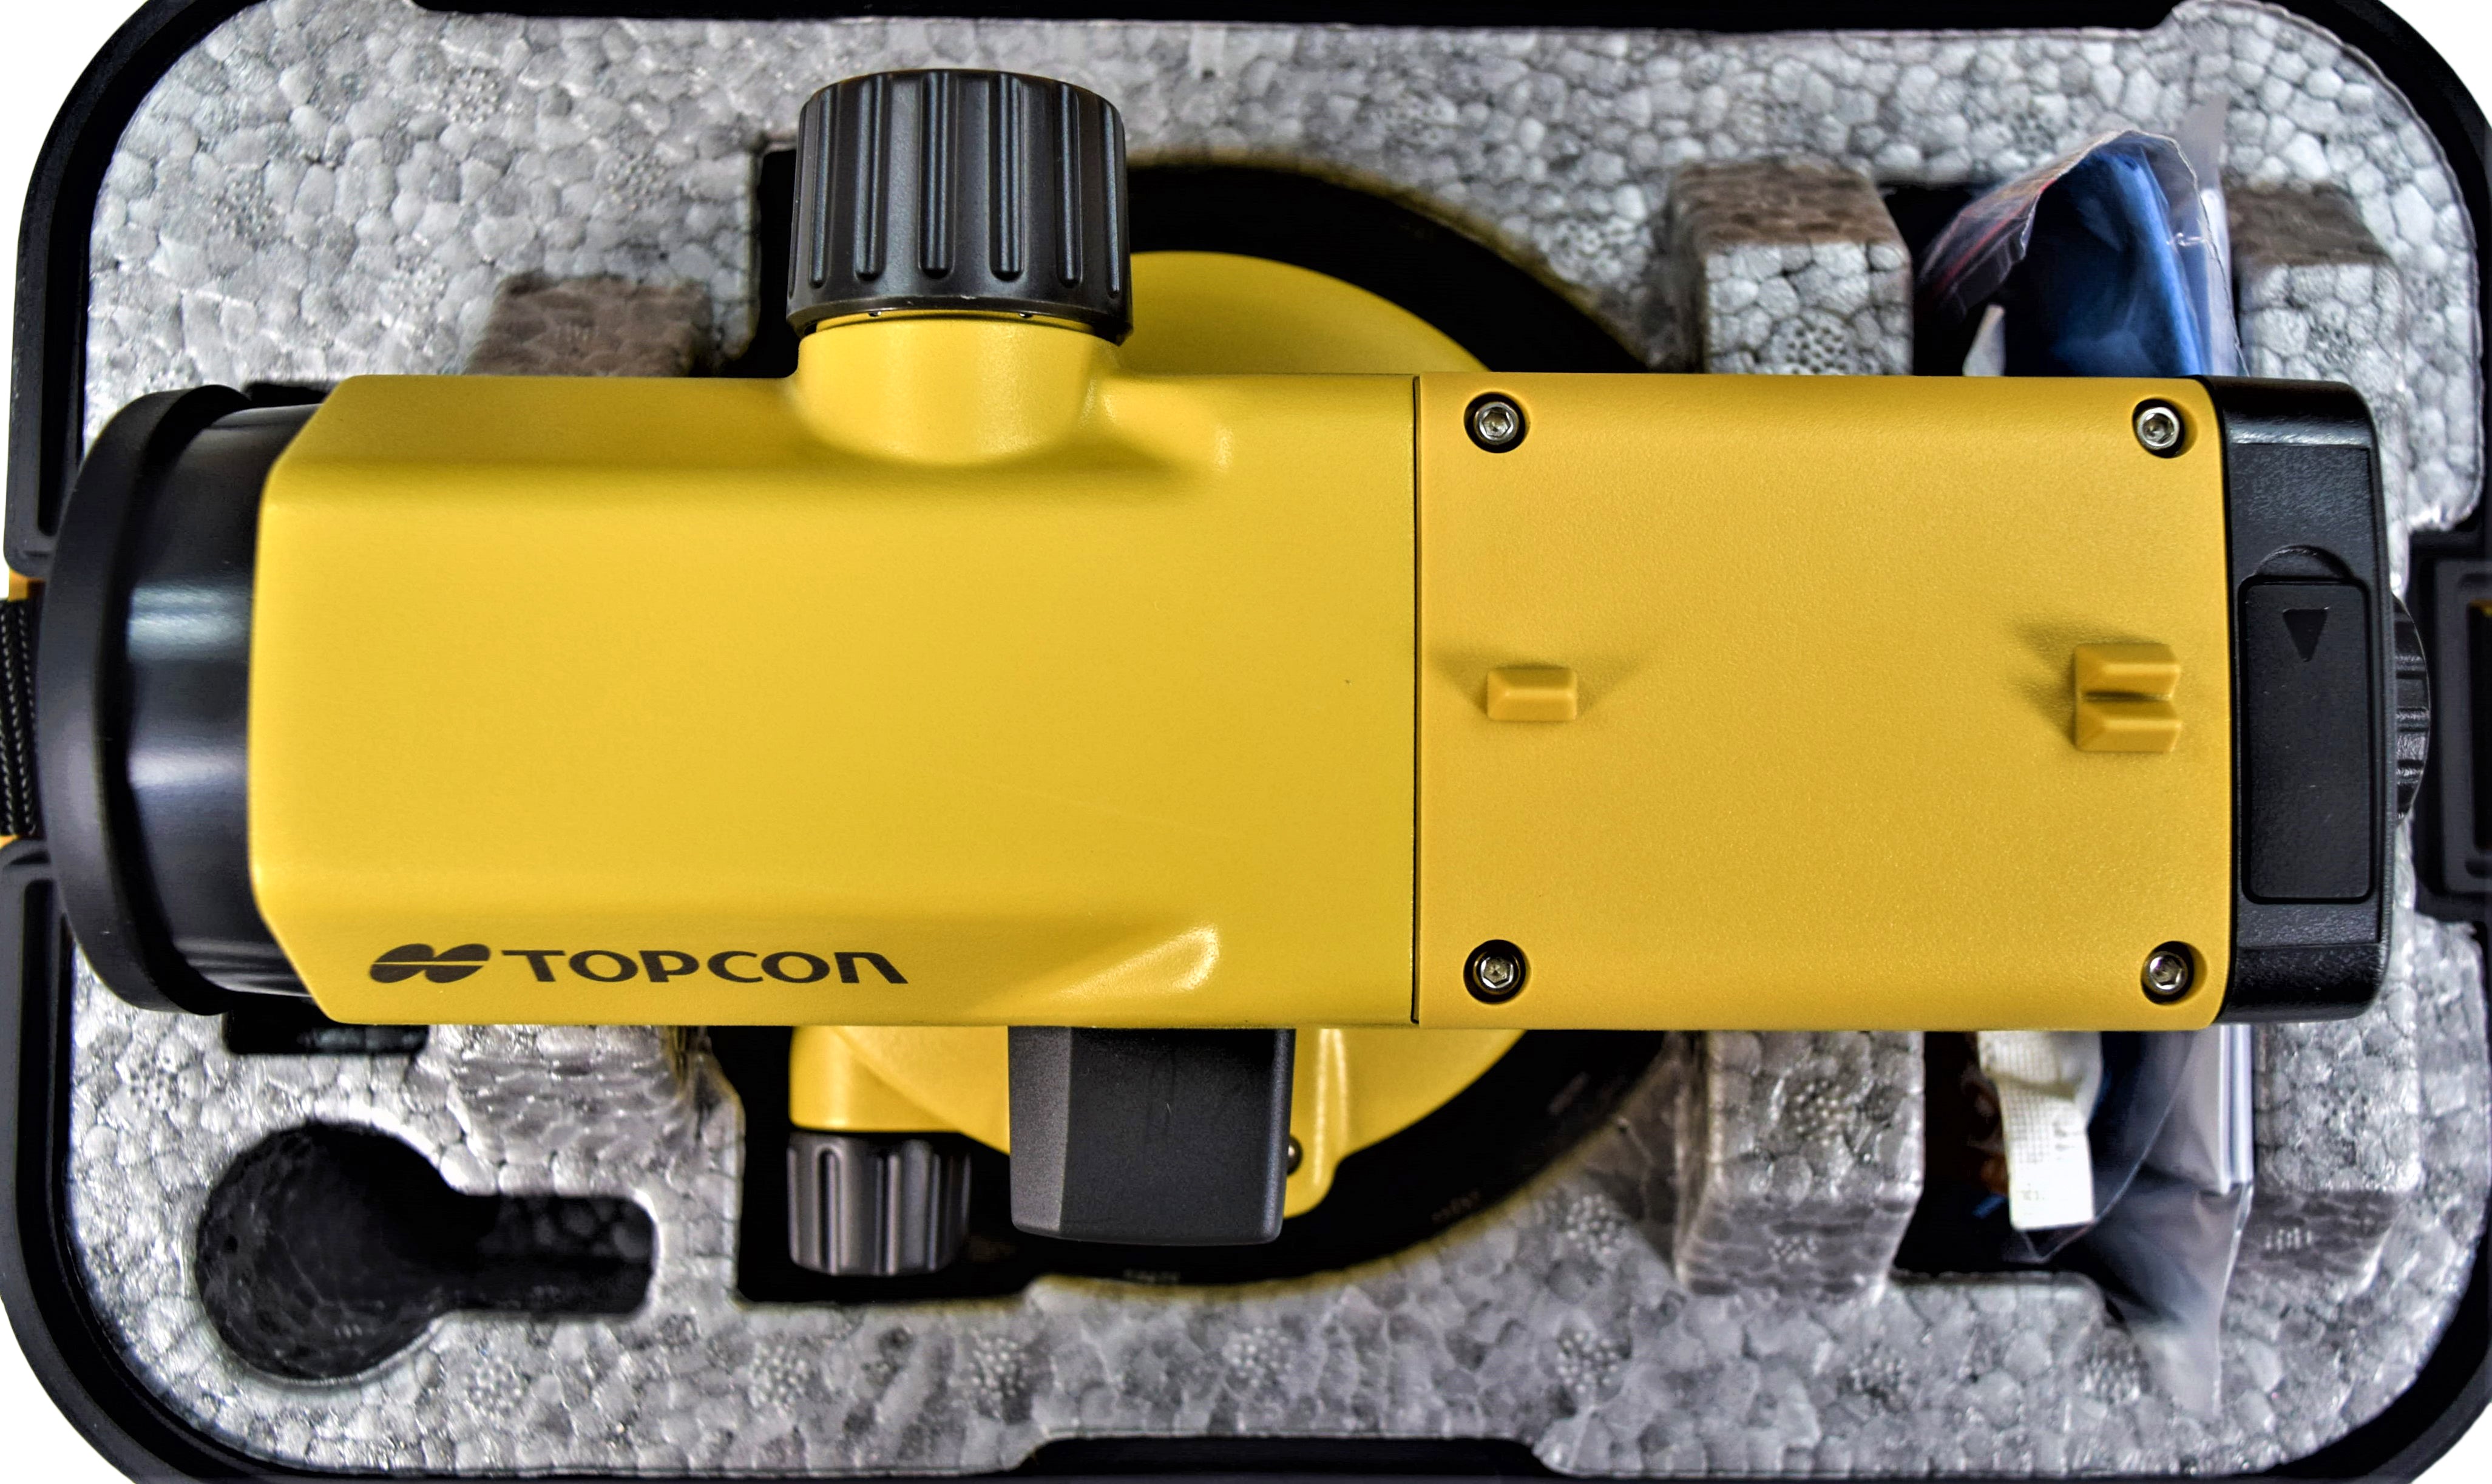 Topcon AT-B4A Heavy Duty 24X Automatic Optical Automatic Level Kit